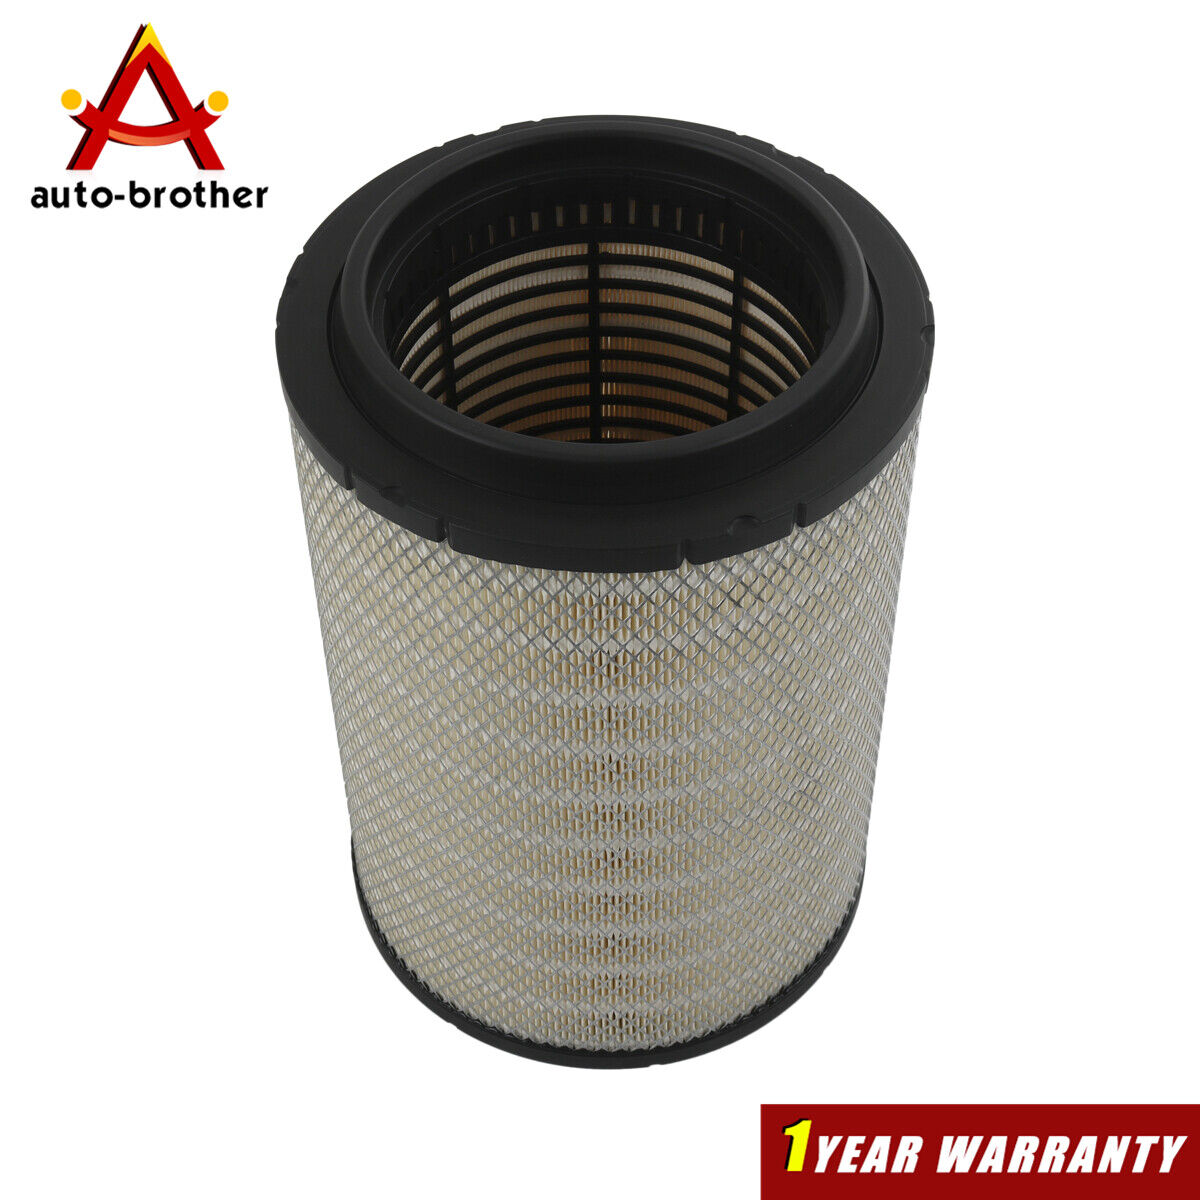 ENGINE AIR FILTER FOR VOLVO VNL Cross: 21715813, RS4642, P606720, LAF9201